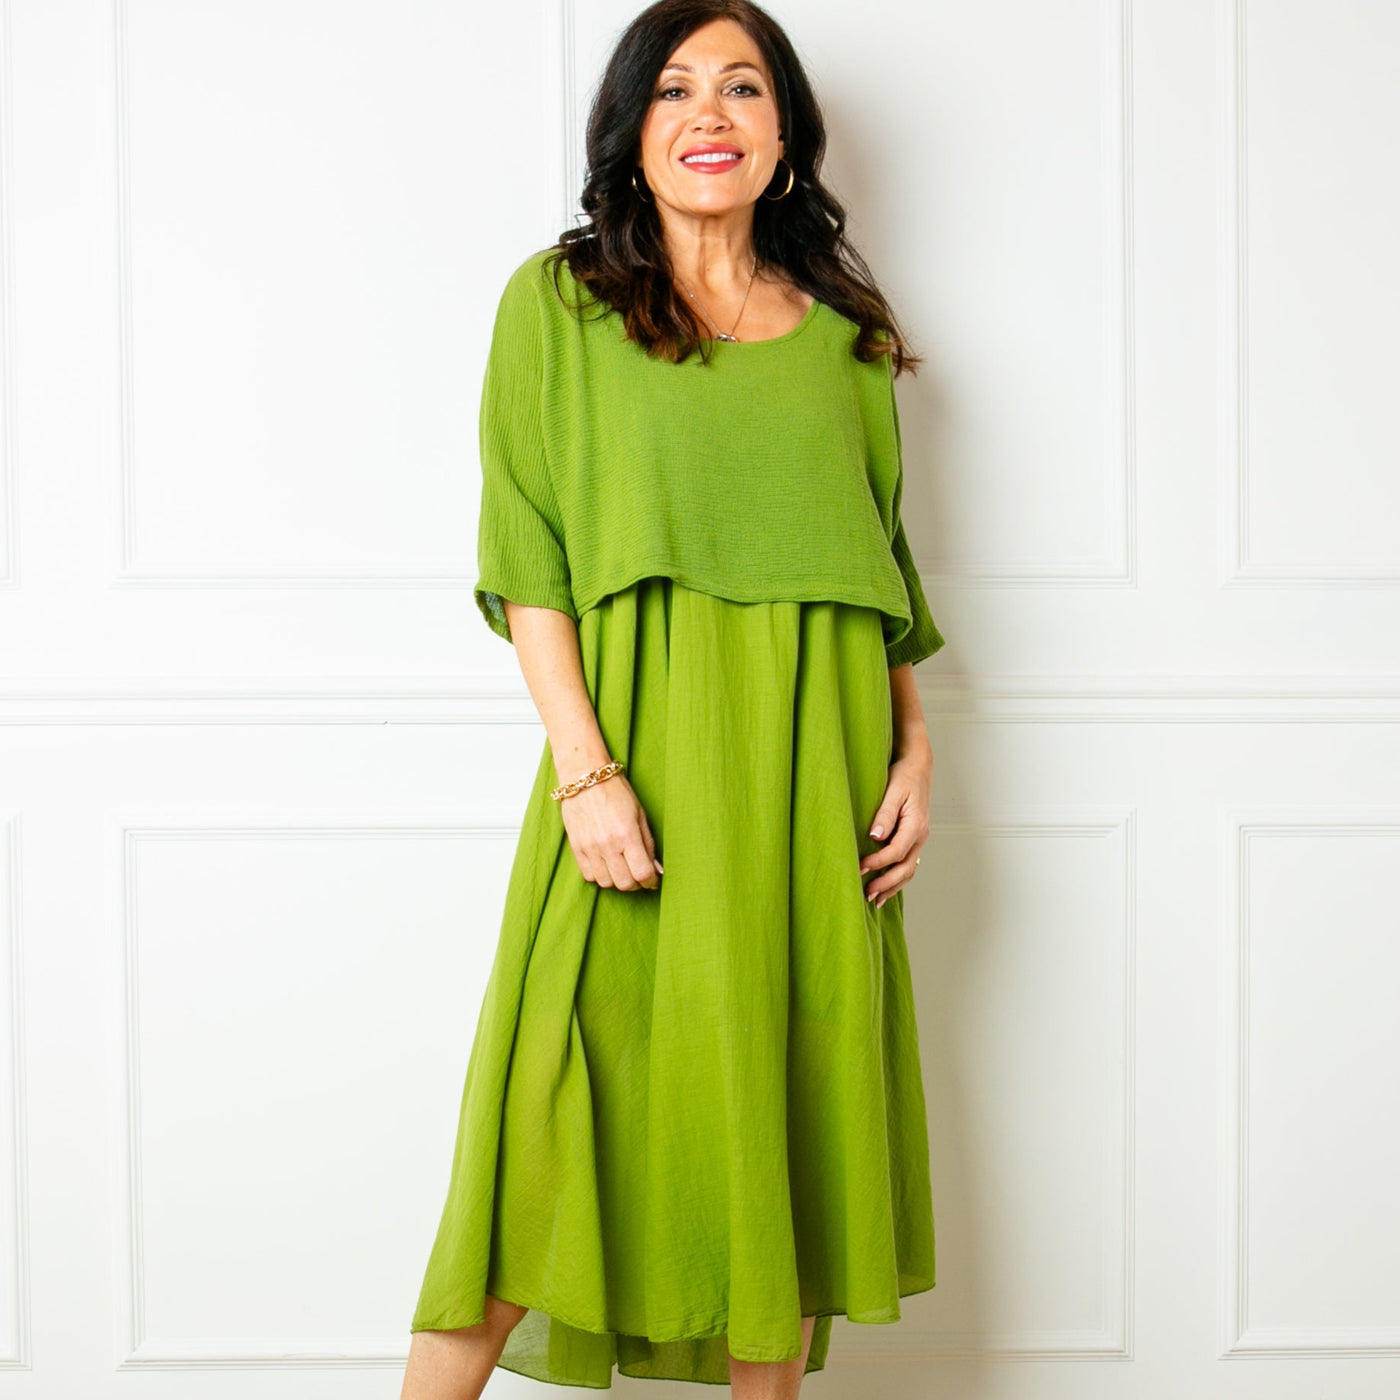 The green Two Piece Dress with a top that has 3/4 length sleeves and a round neckline